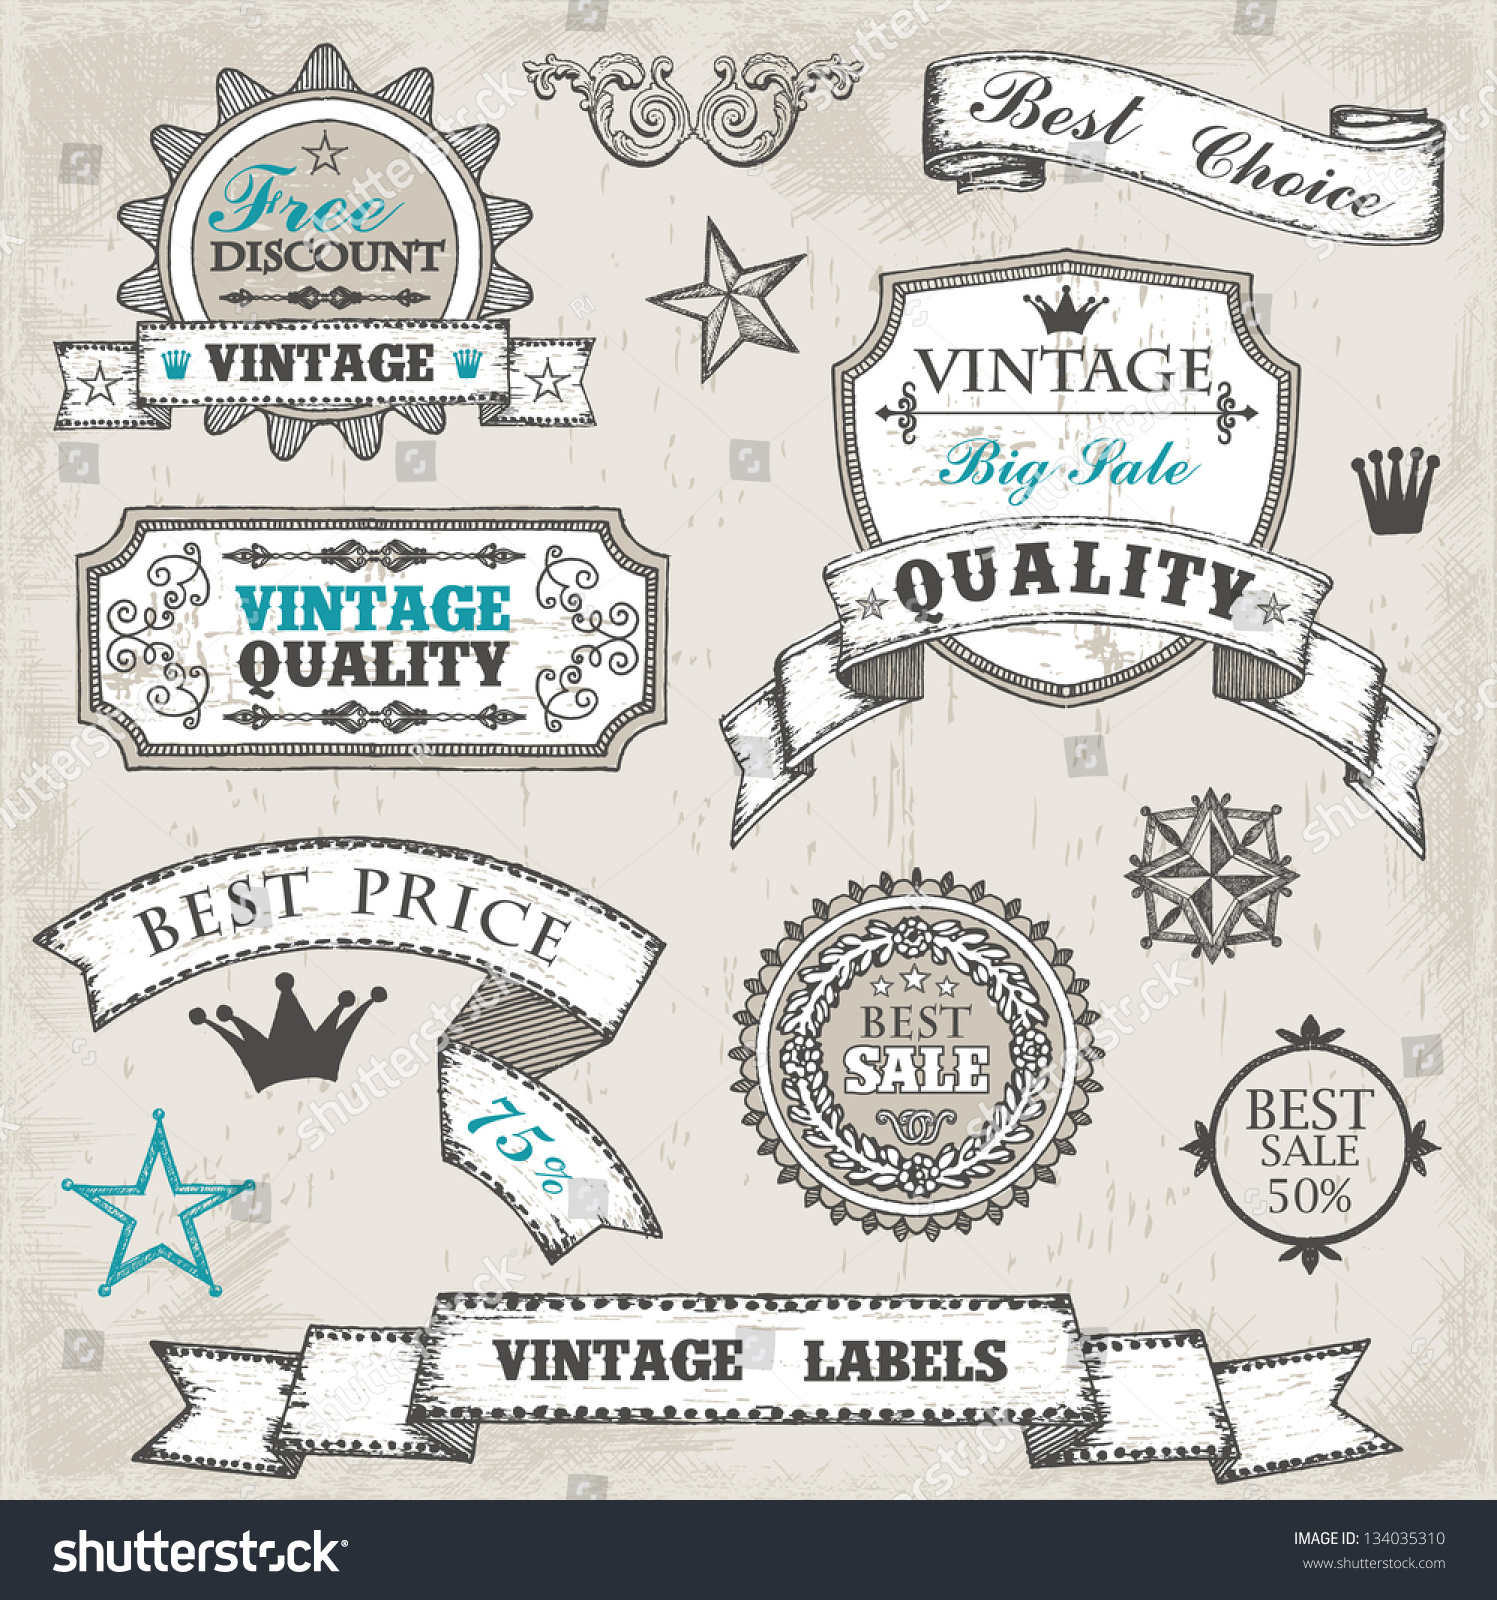 Hand Drawn Vintage Labels And Stamps Stock Vector Illustration ...